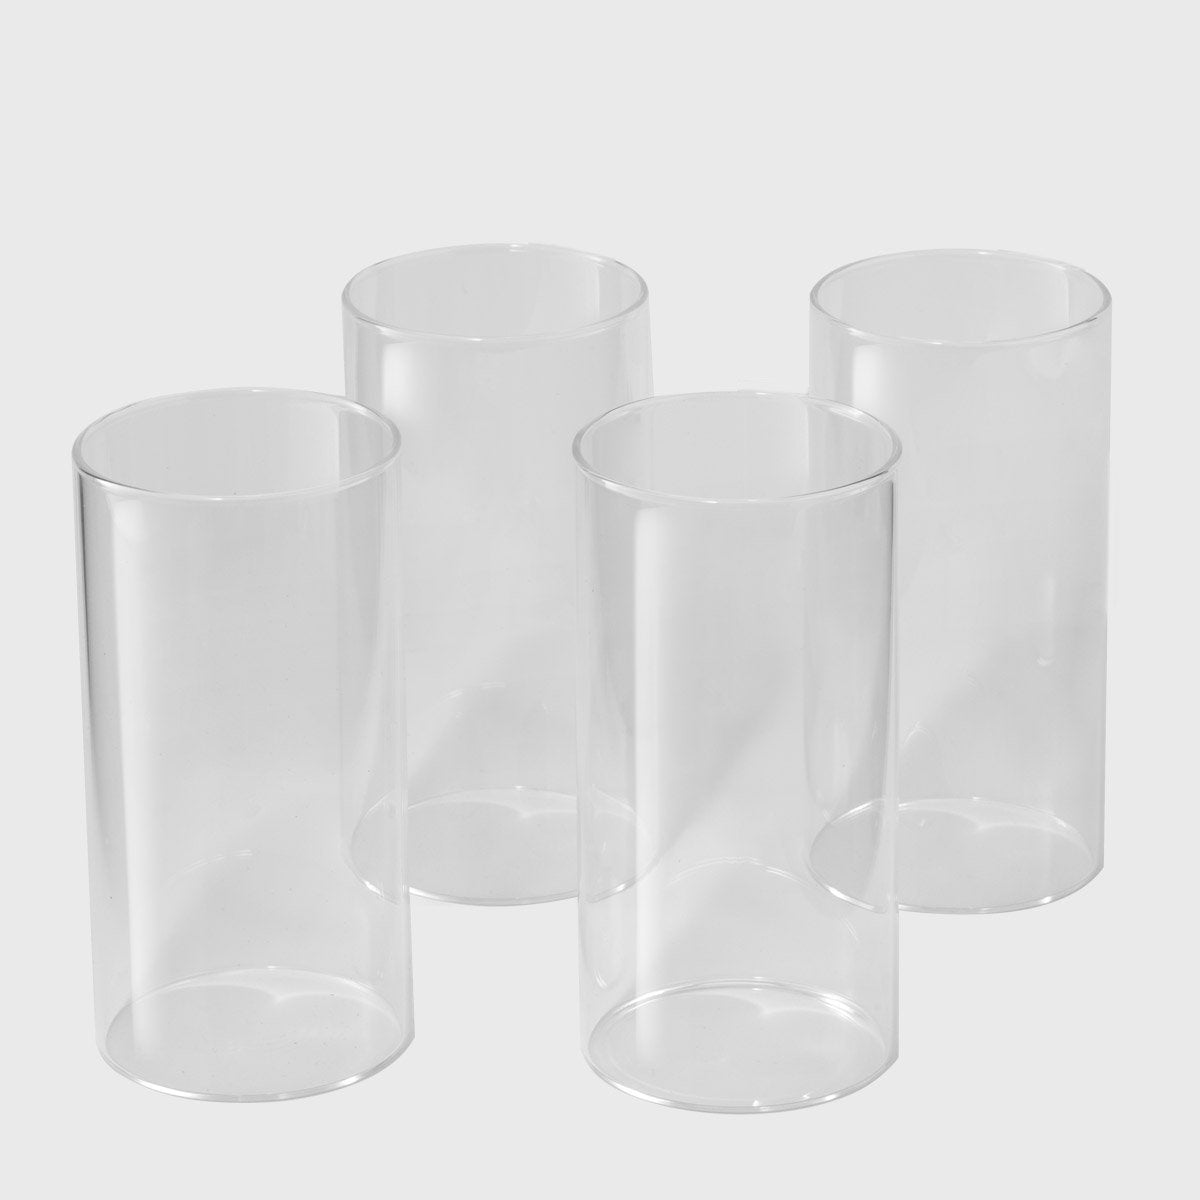 StyleWell 17 oz. and 10 oz. Glass Tumblers (Set of 16) P7778 - The